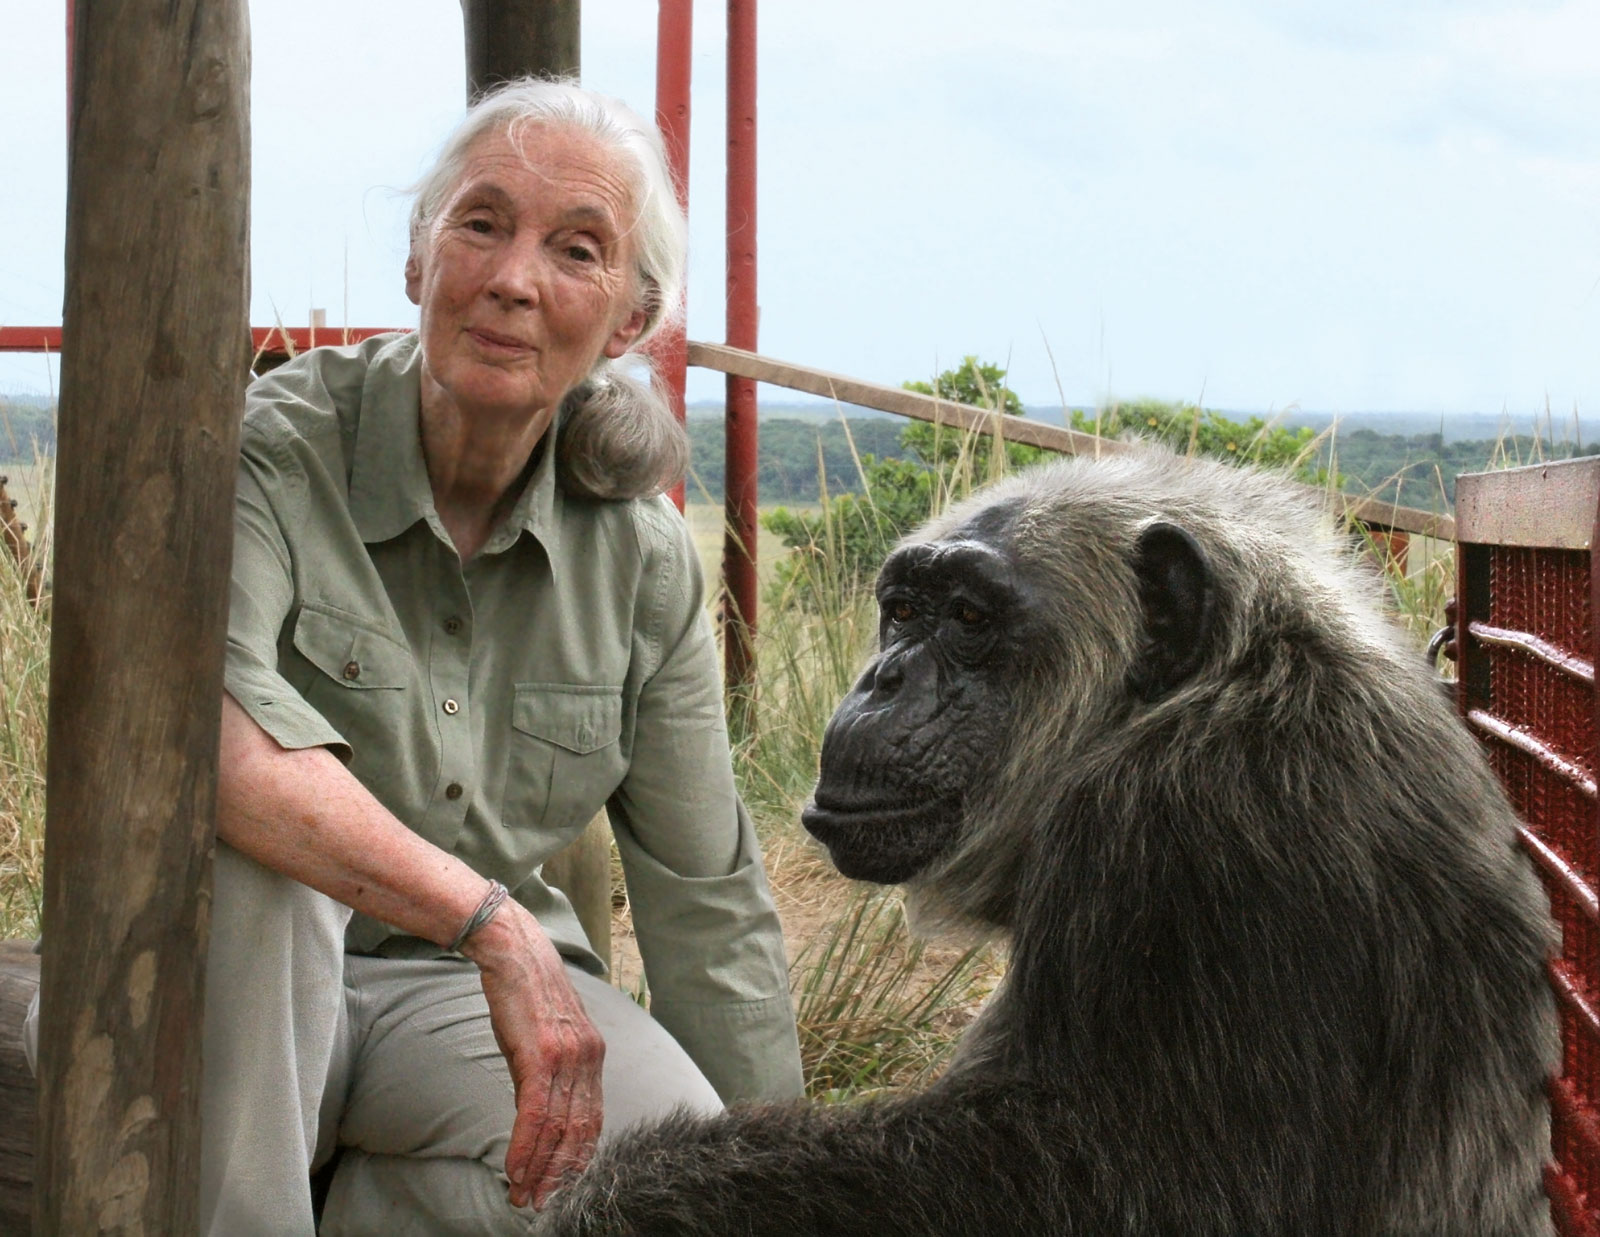 Jane Goodall Wins the Templeton Prize